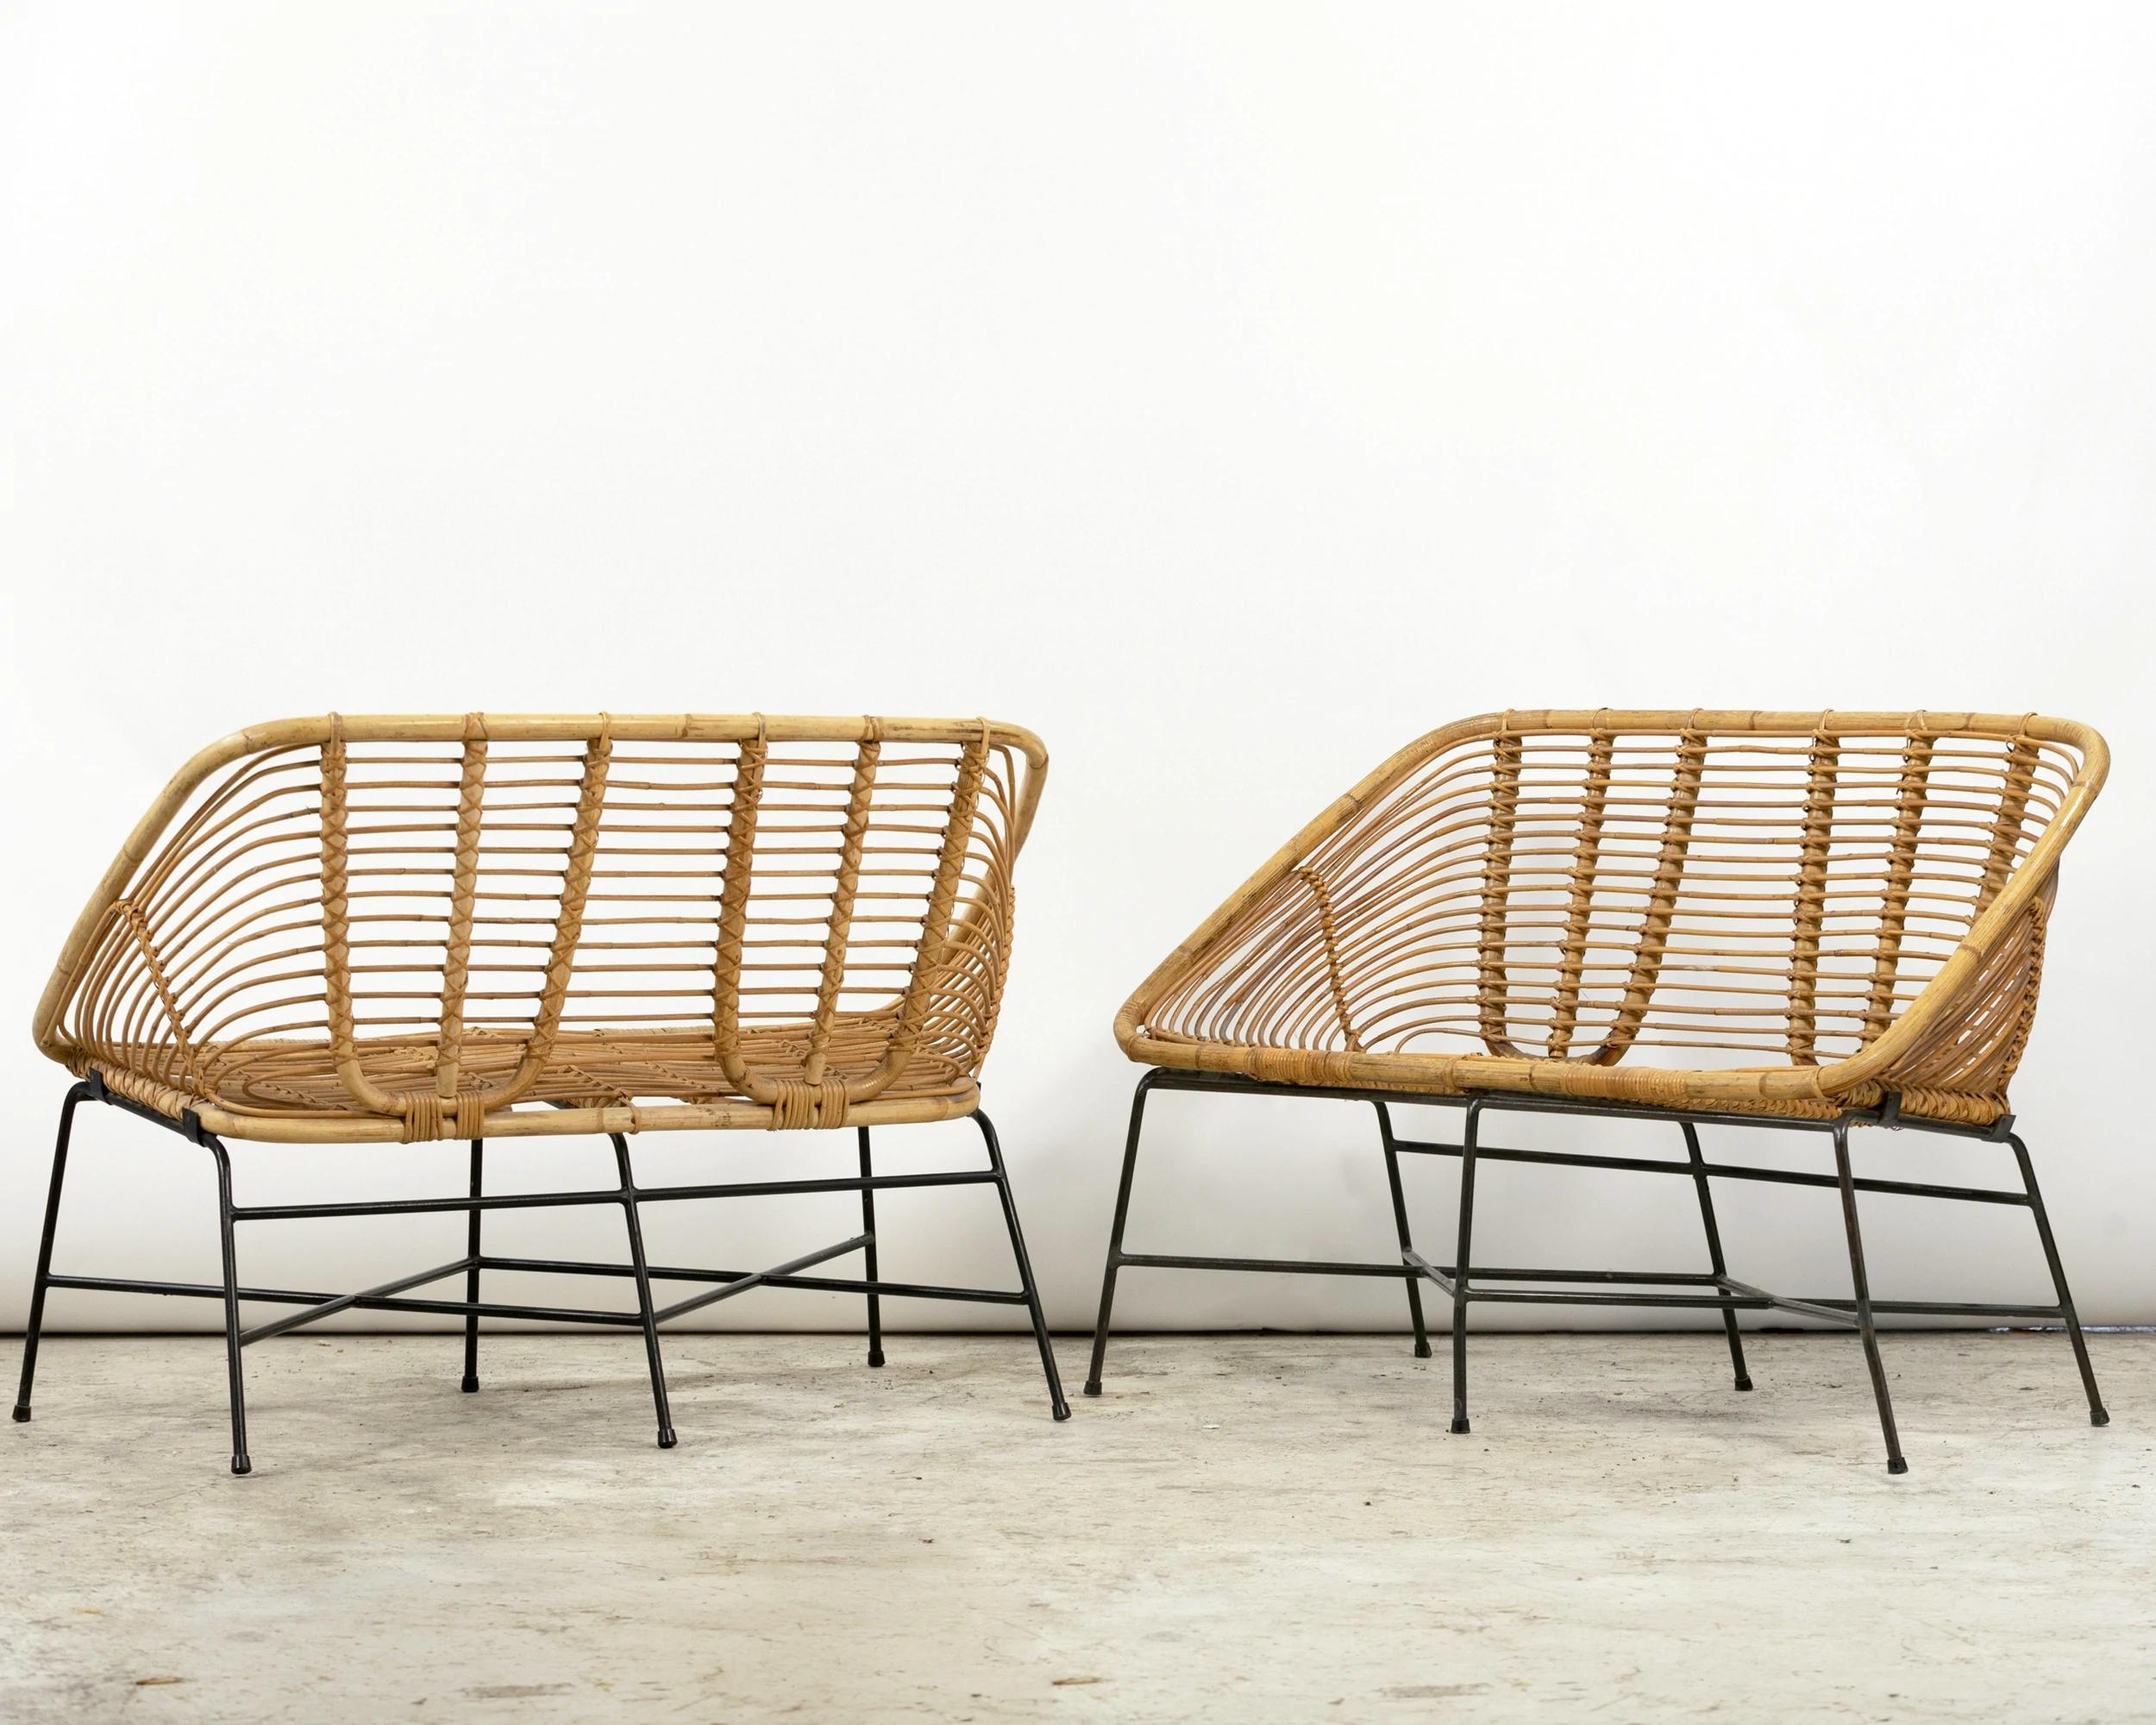 Pair of rattan and lacquered iron bench seats, France circa 1950. The one-piece basket-like seat is fixed to a base with six legs and two blackened iron struts. The end of each leg is fitted with a rubber tip.